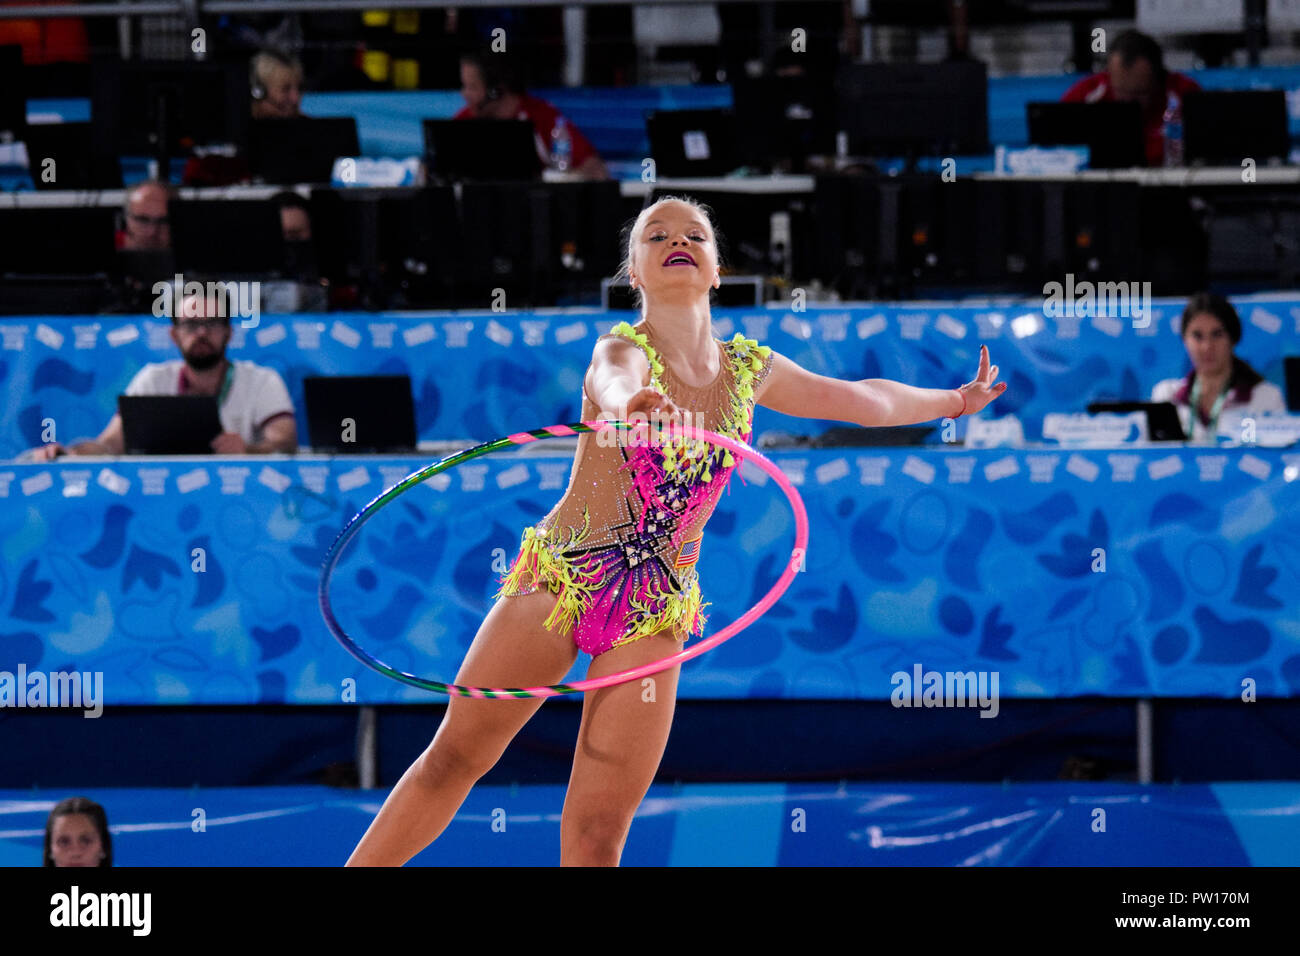 Buenos Aires, Buenos Aires, Argentina. 9th Oct, 2018. Kapitonova Elizabeth seen in action during the game where she finished in the 13th position in the rhythmic gymnastics competition. Credit: Fernando Oduber/SOPA Images/ZUMA Wire/Alamy Live News Stock Photo